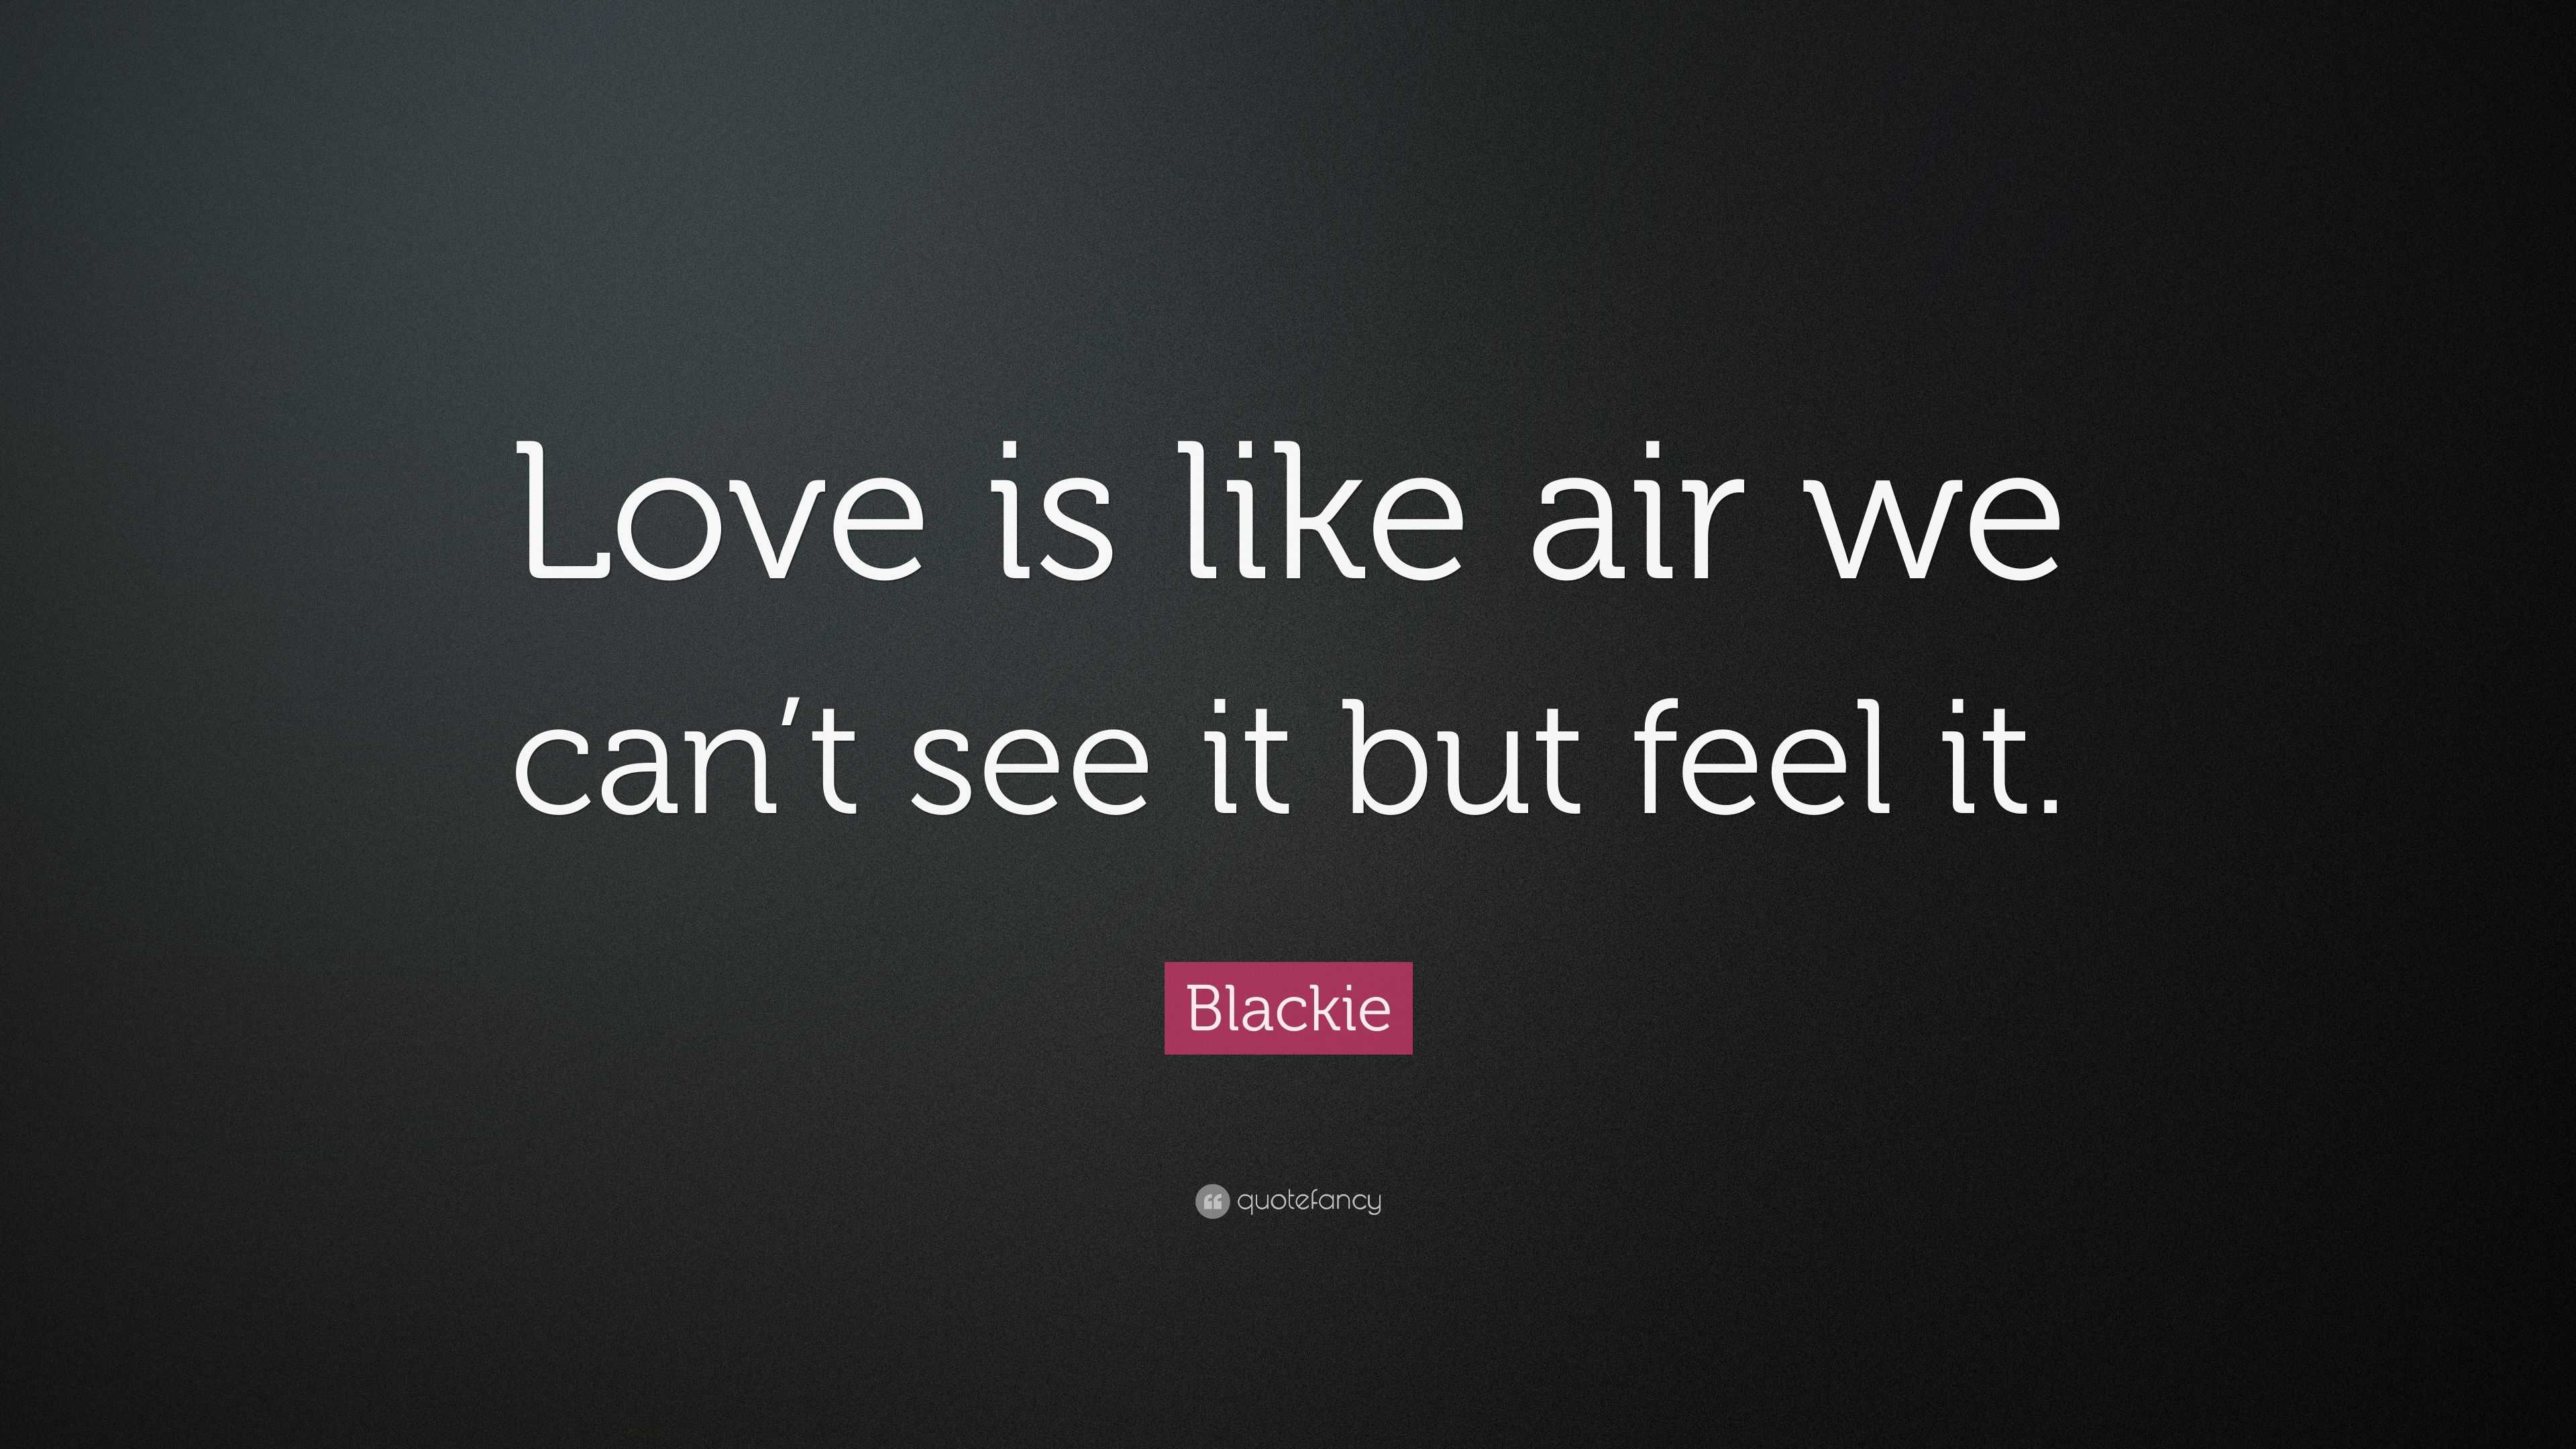 Blackie Quote “Love is like air we can t see it but feel